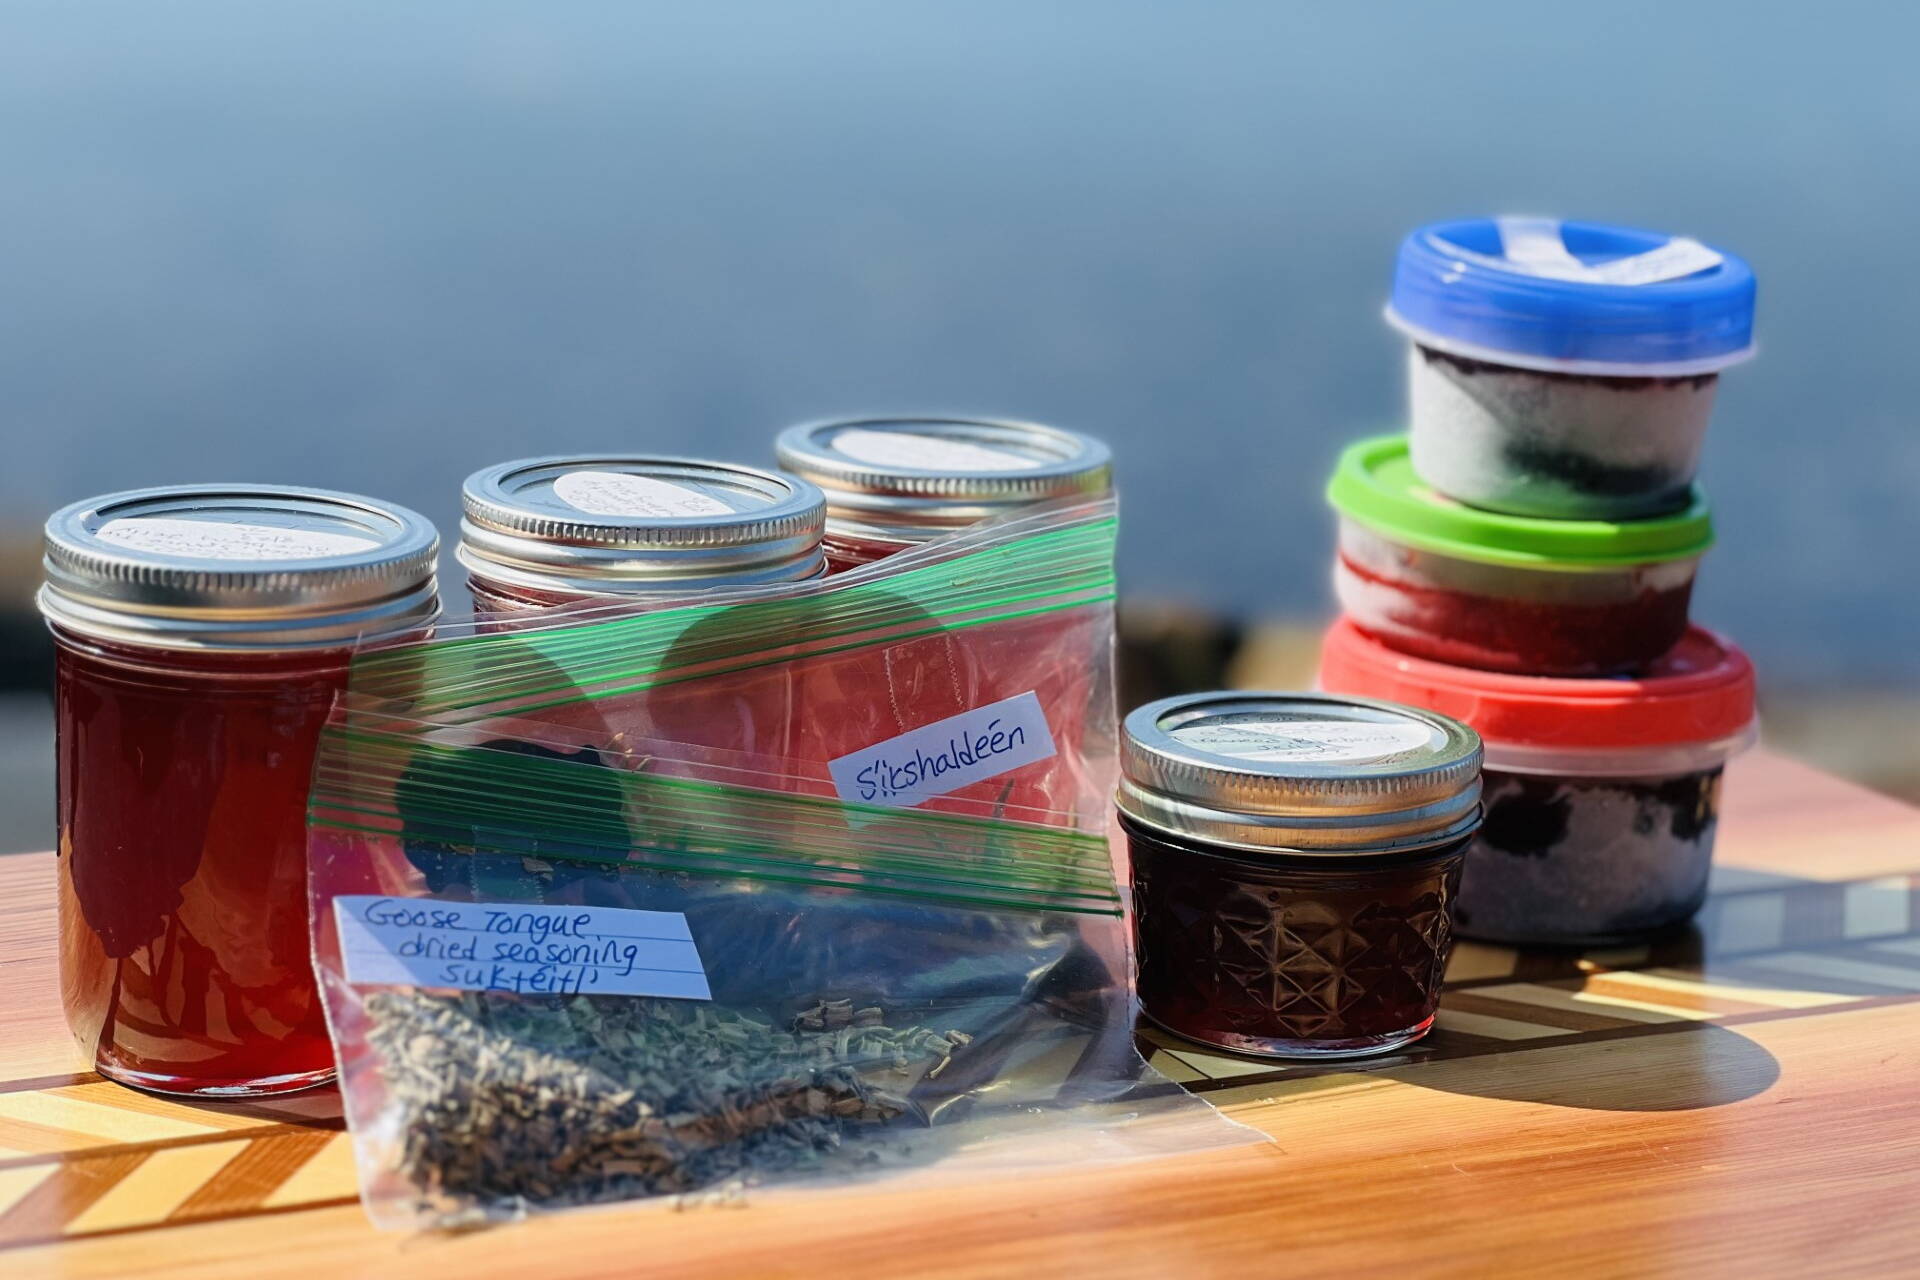 Sample jellies, jams, and dried goods to gift to local elders and tribal citizens. (Photo by Vivian Faith Prescott)